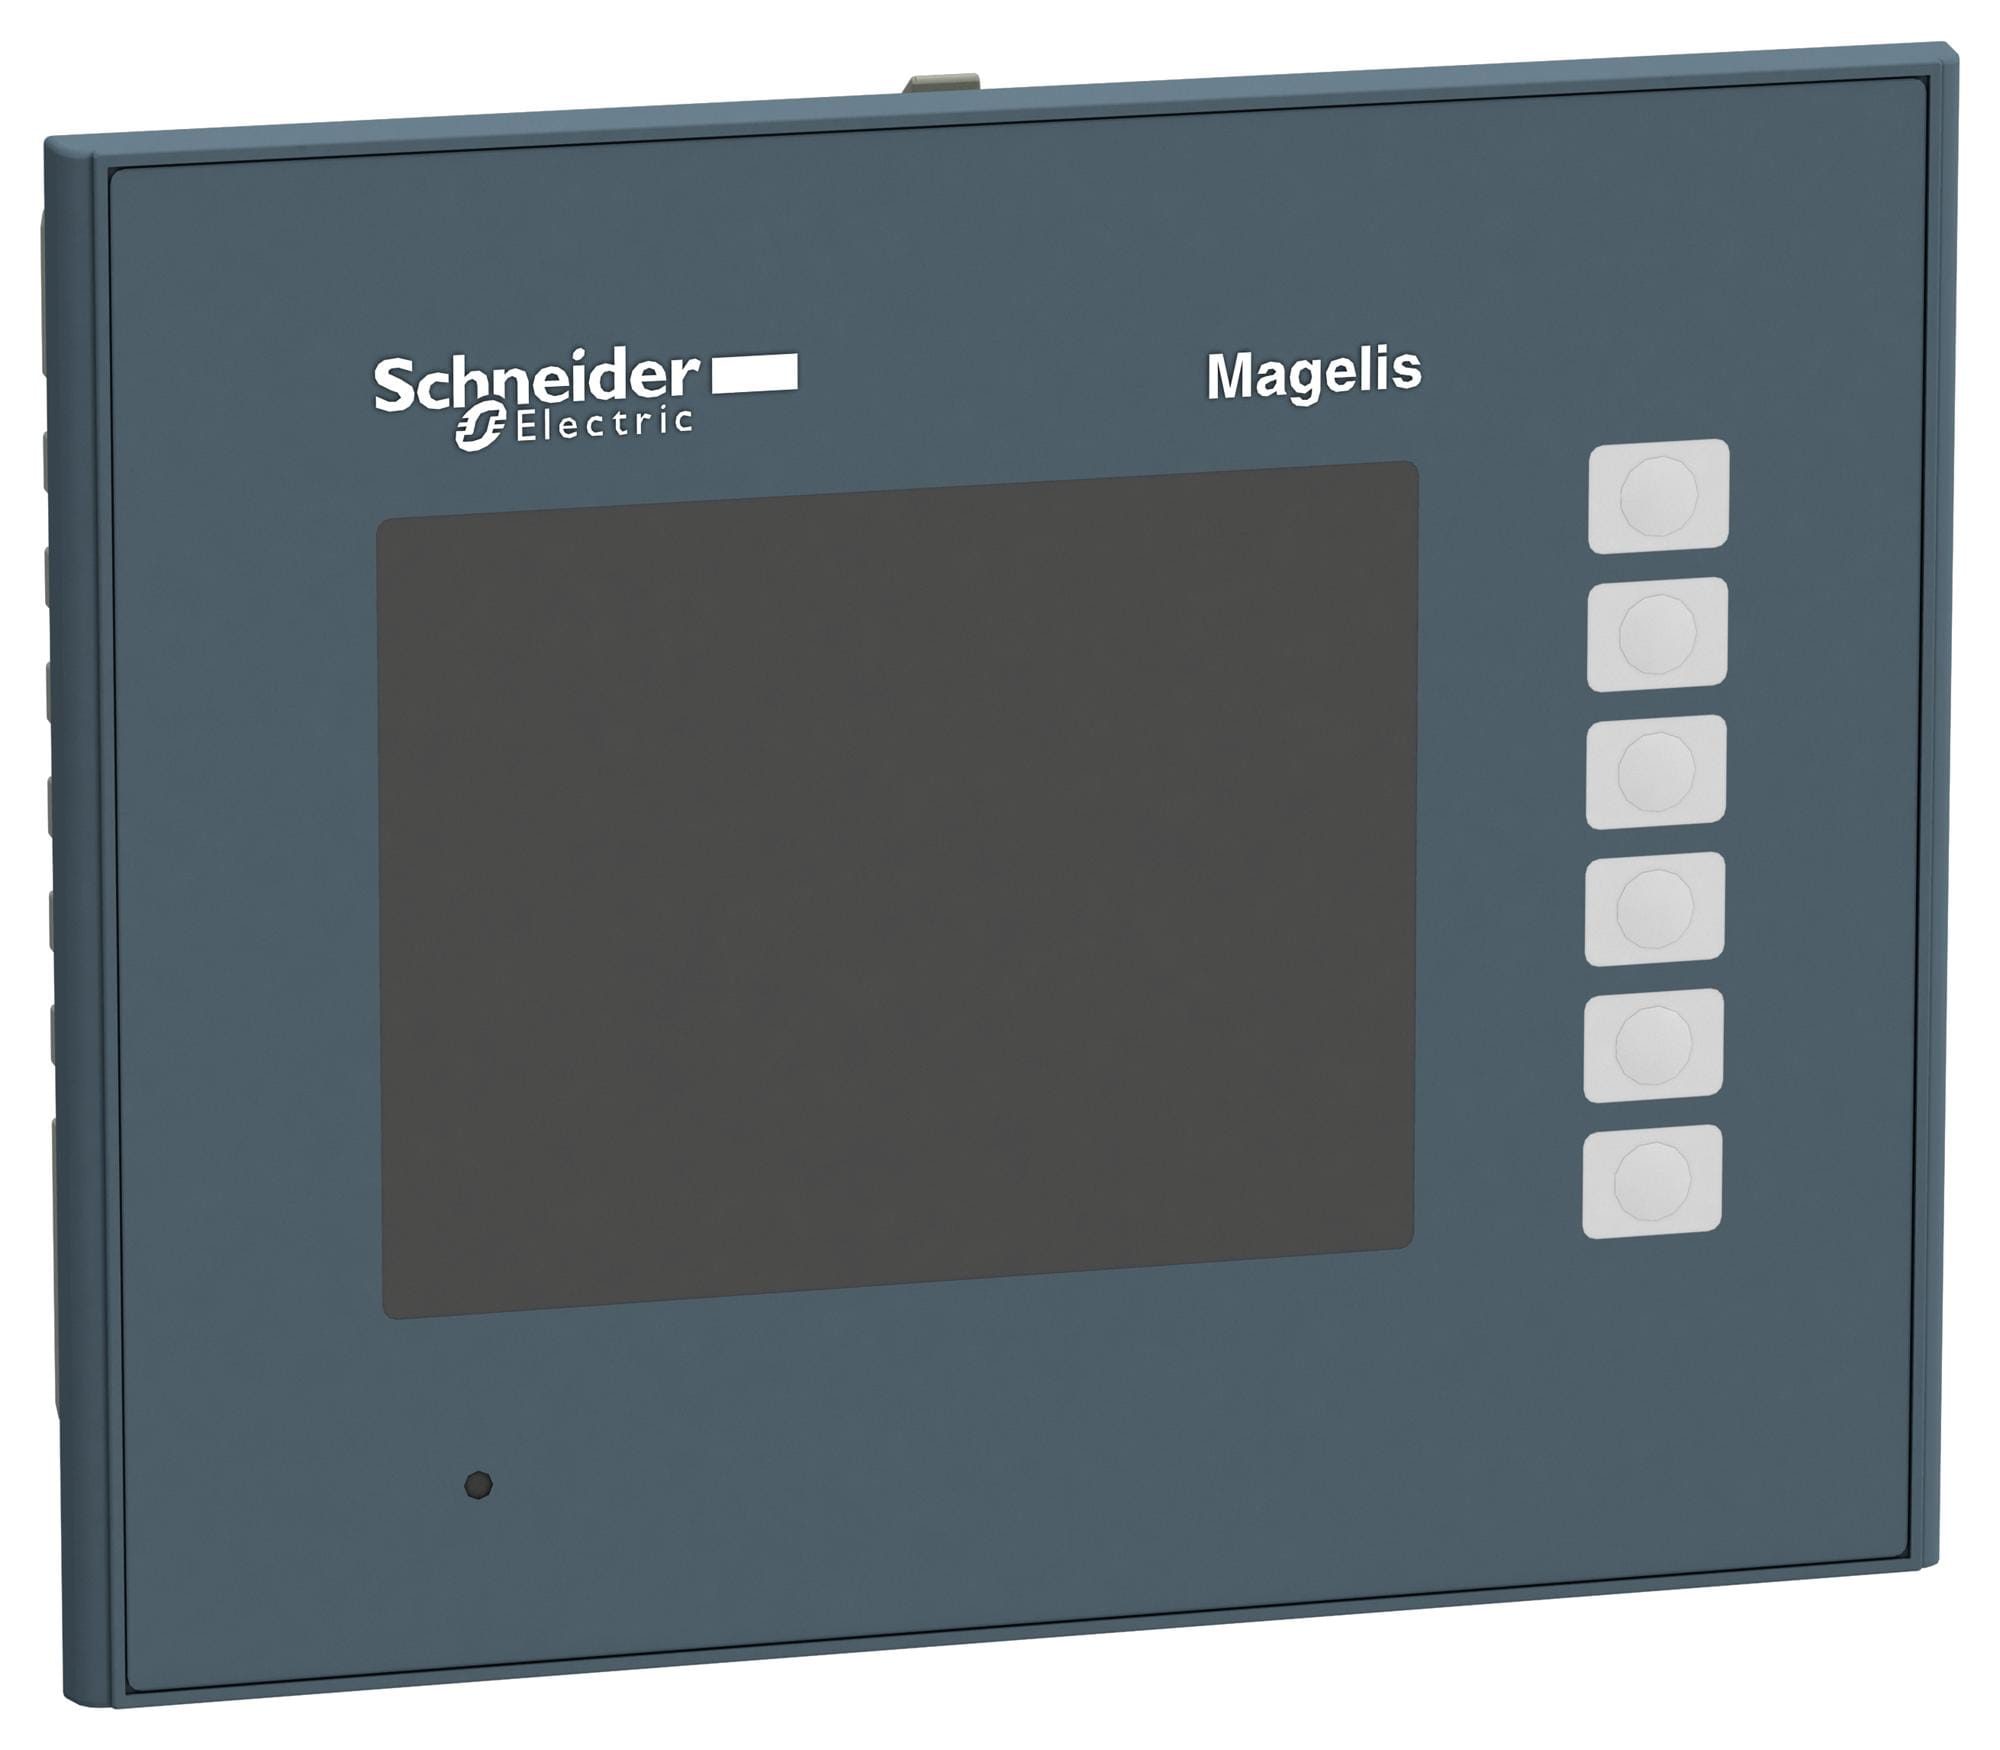 SCHNEIDER ELECTRIC Character HMIGTO1300 TOUCHSCREEN PANEL, 64MB, 3.5", 320 X 240 SCHNEIDER ELECTRIC 3109858 HMIGTO1300